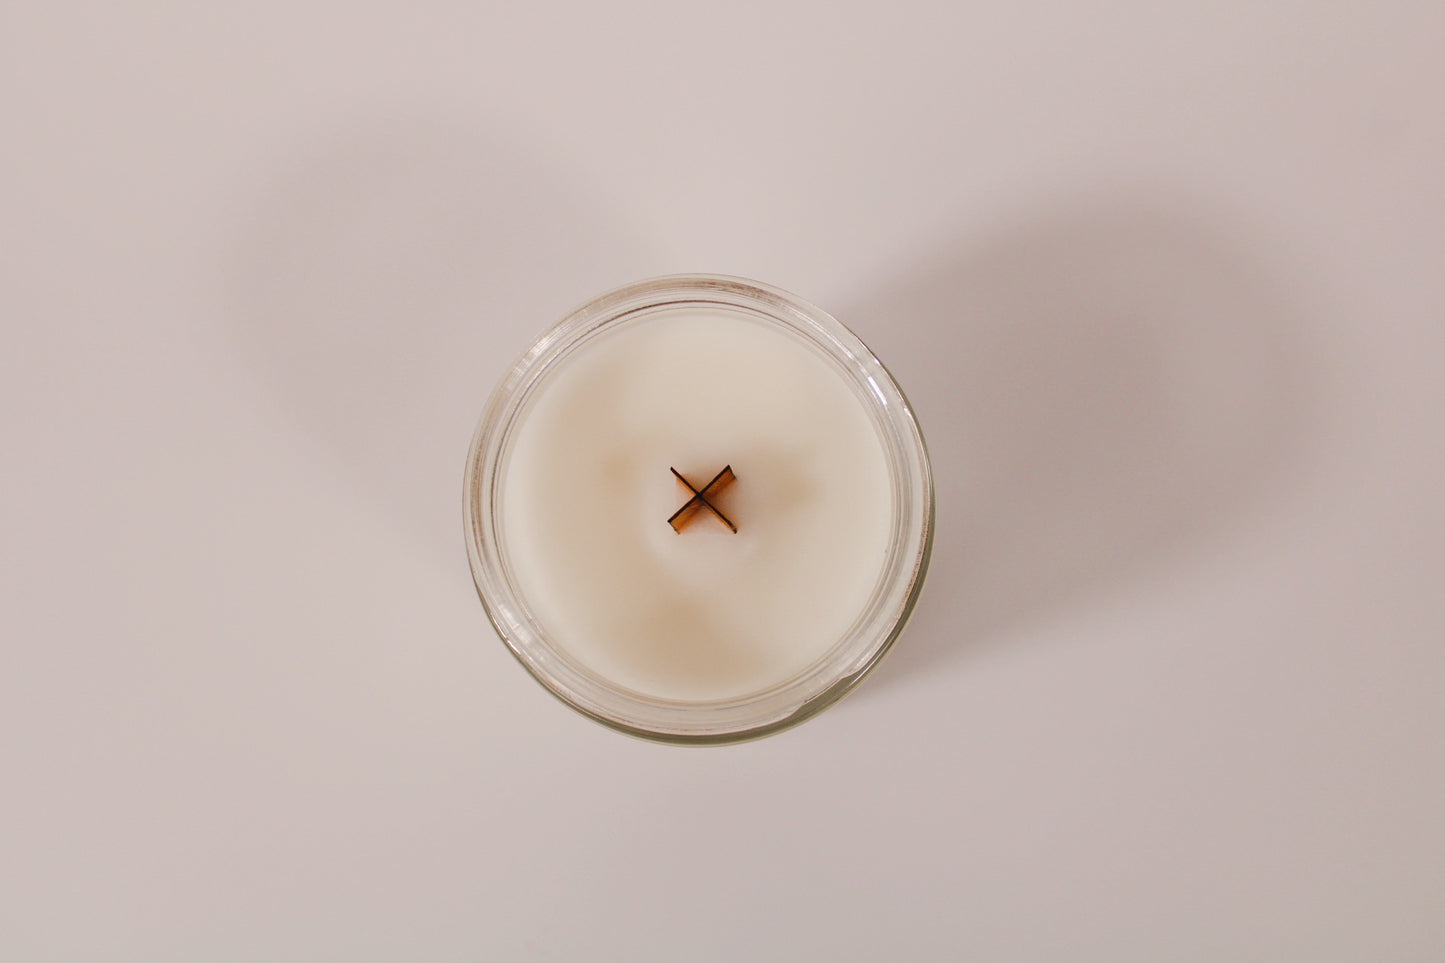 Cashmere Glow Candle | Lil Dope Wick.co